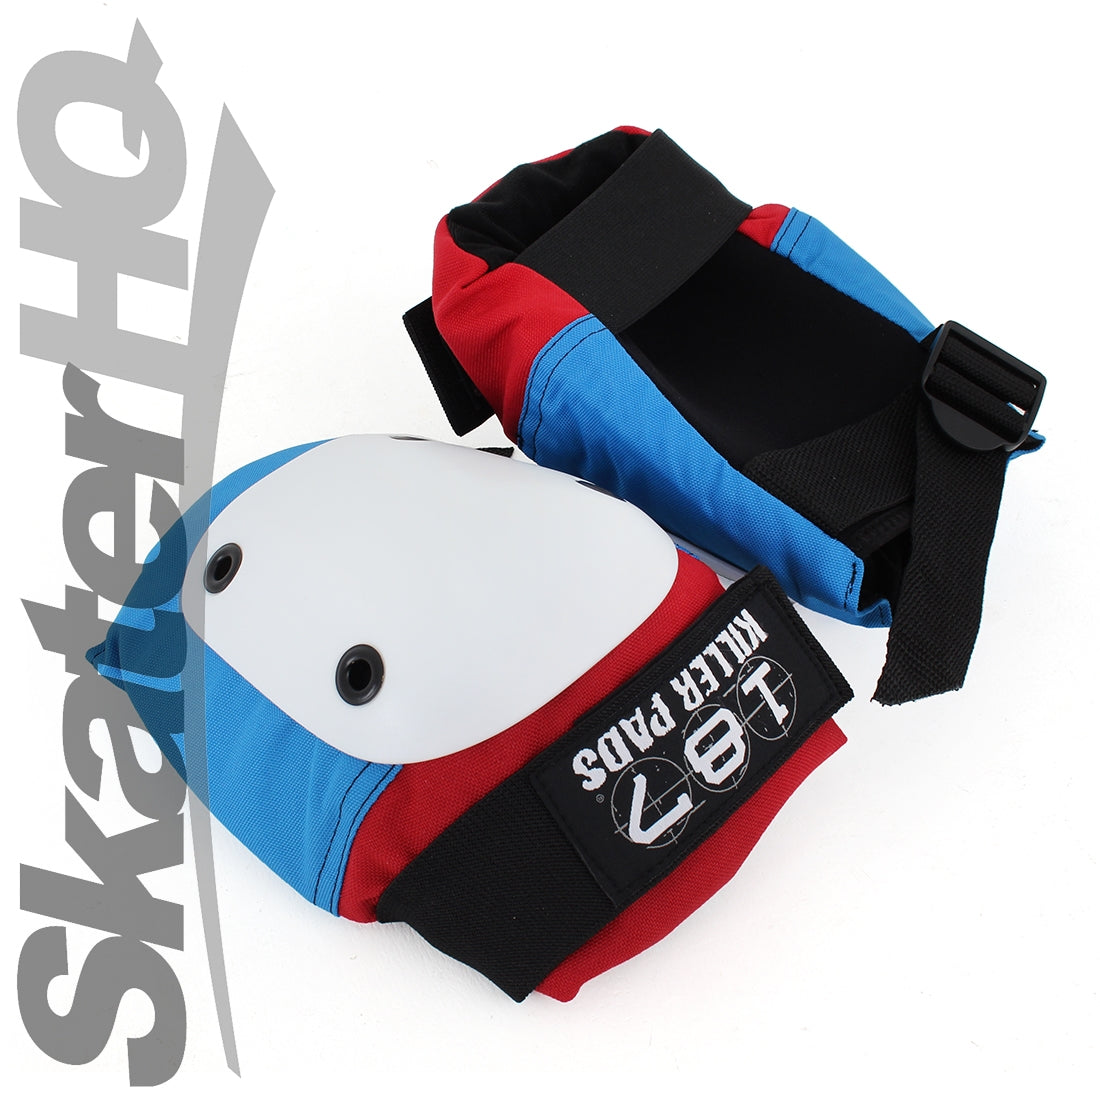 187 Fly Knee Pads - Red/White/Blue Protective Gear